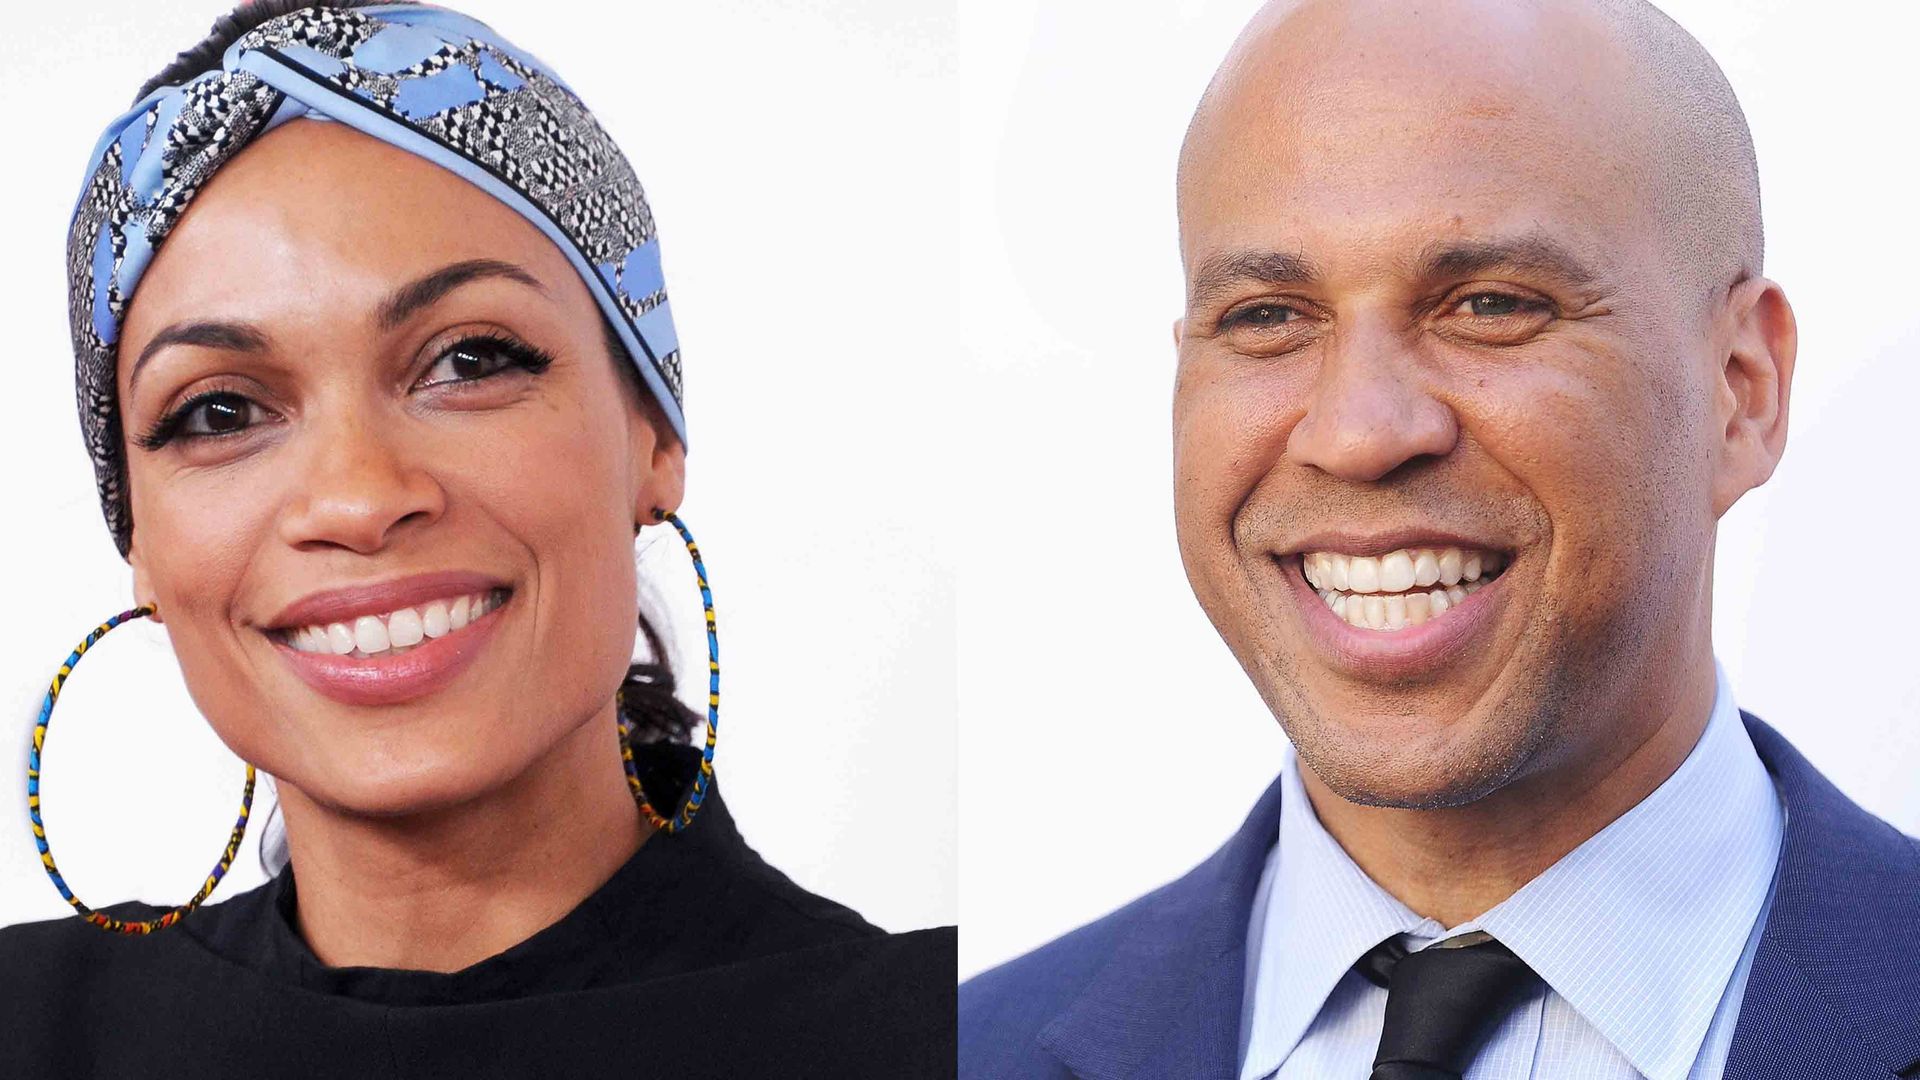 Who Is Cory Booker Dating? What We Know About Cory Booker's Girlfriend